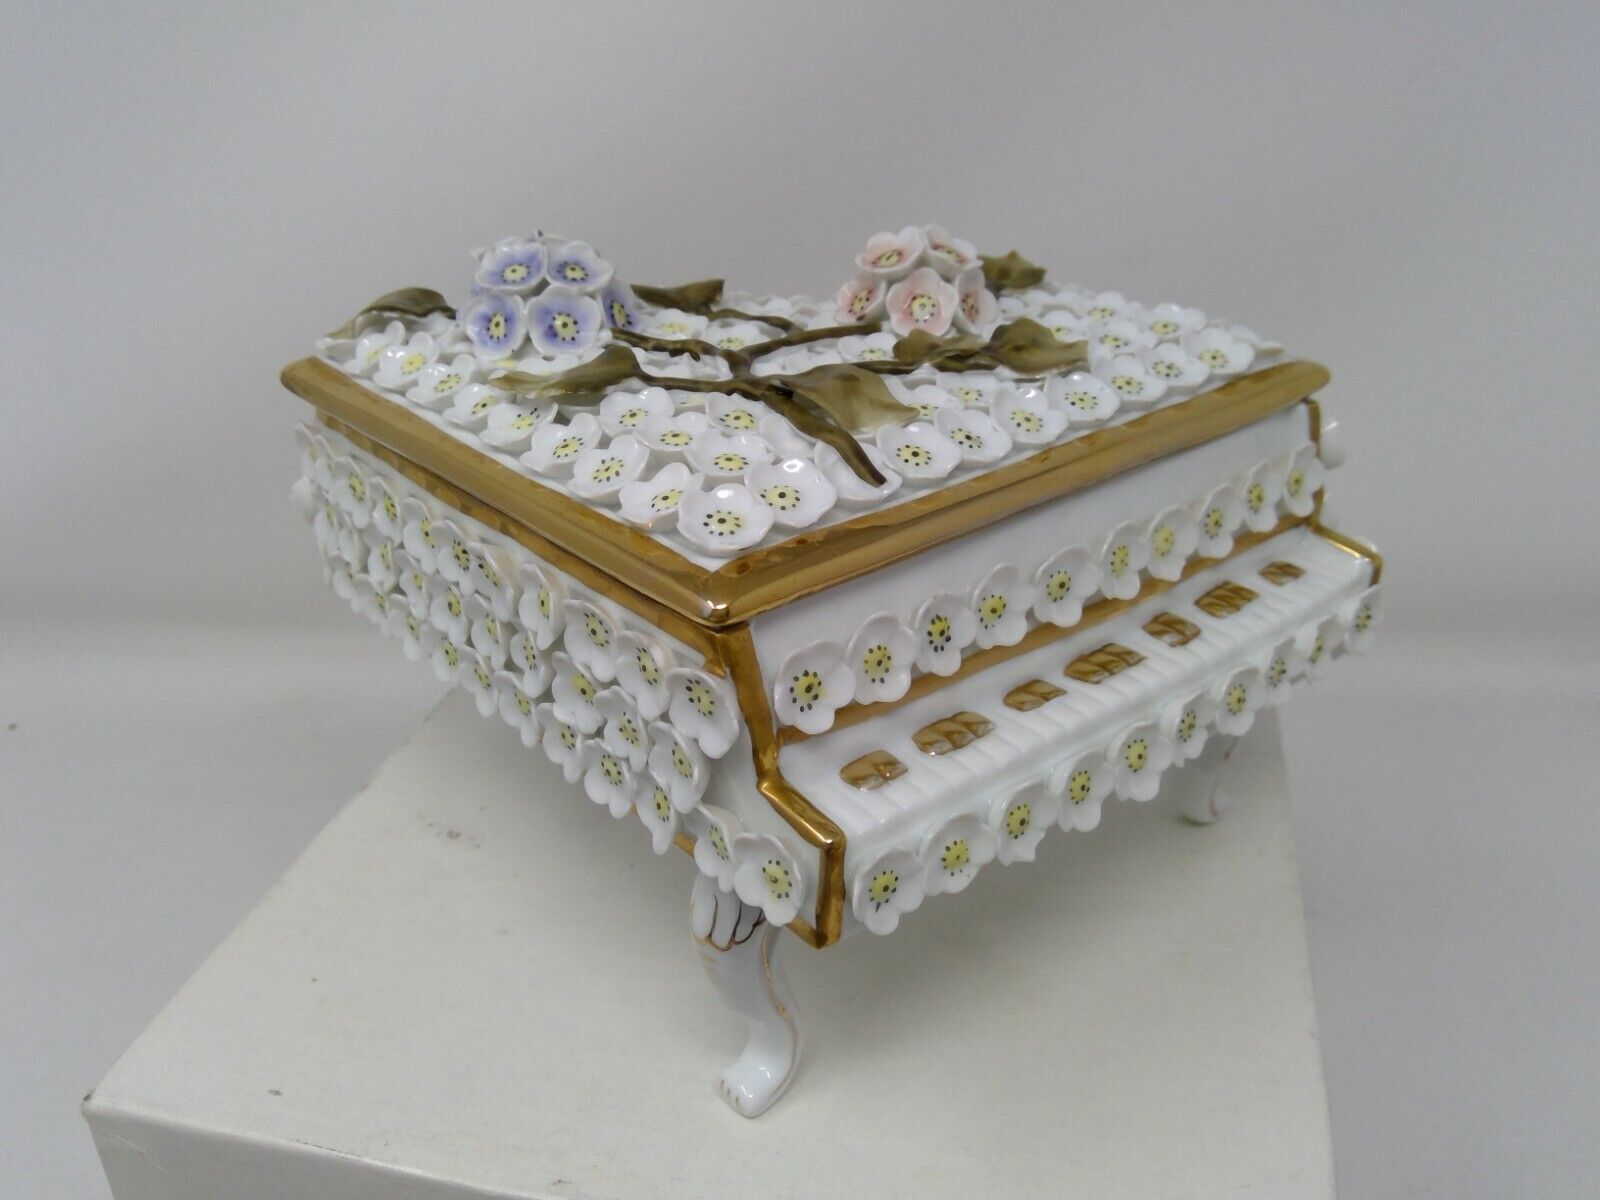 Stunning Porcelain Piano Trinket Box Covered in Applied Flowers